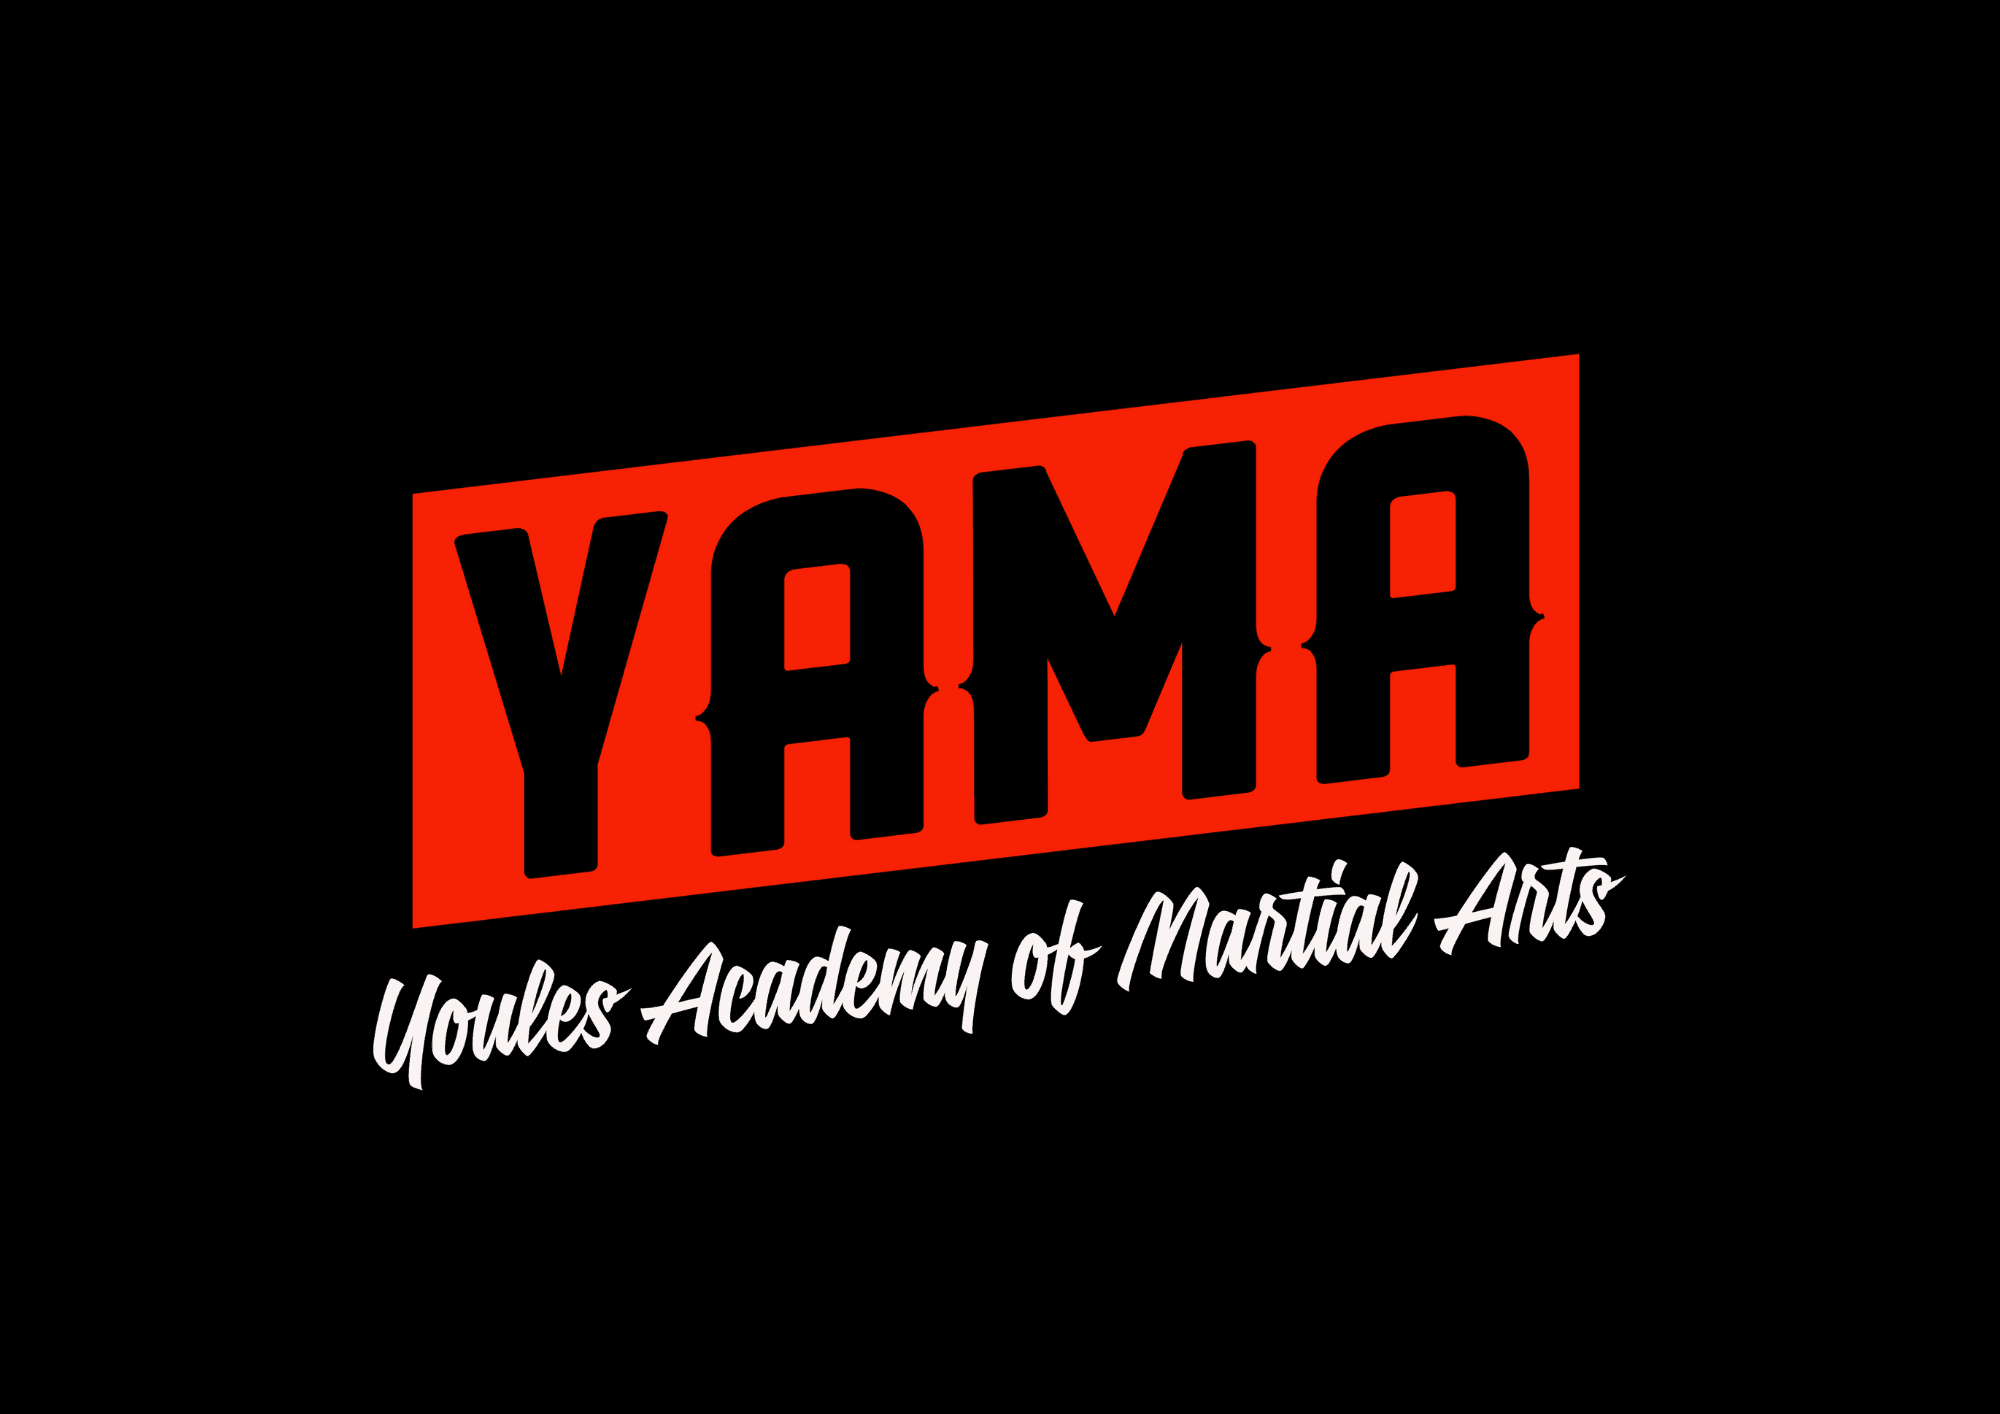 YAMA - The Youles Academy of Martial Arts